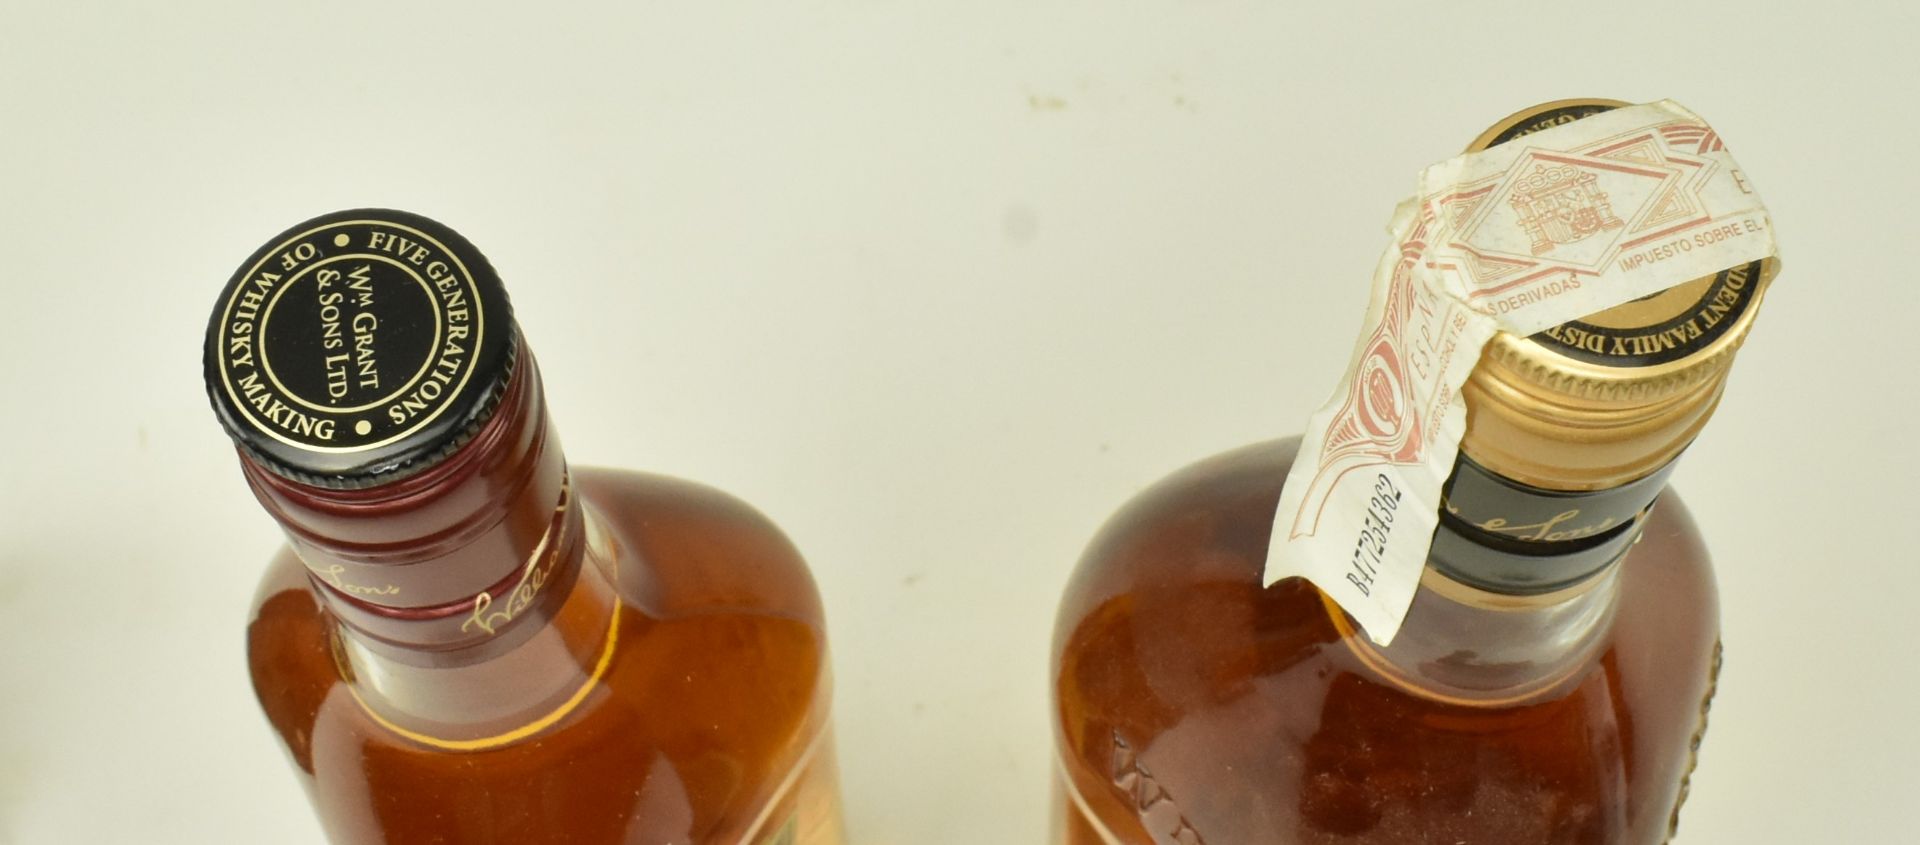 GRANT'S WHISKY - TWO BOTTLES OF SCOTCH WHISKY - Image 3 of 7